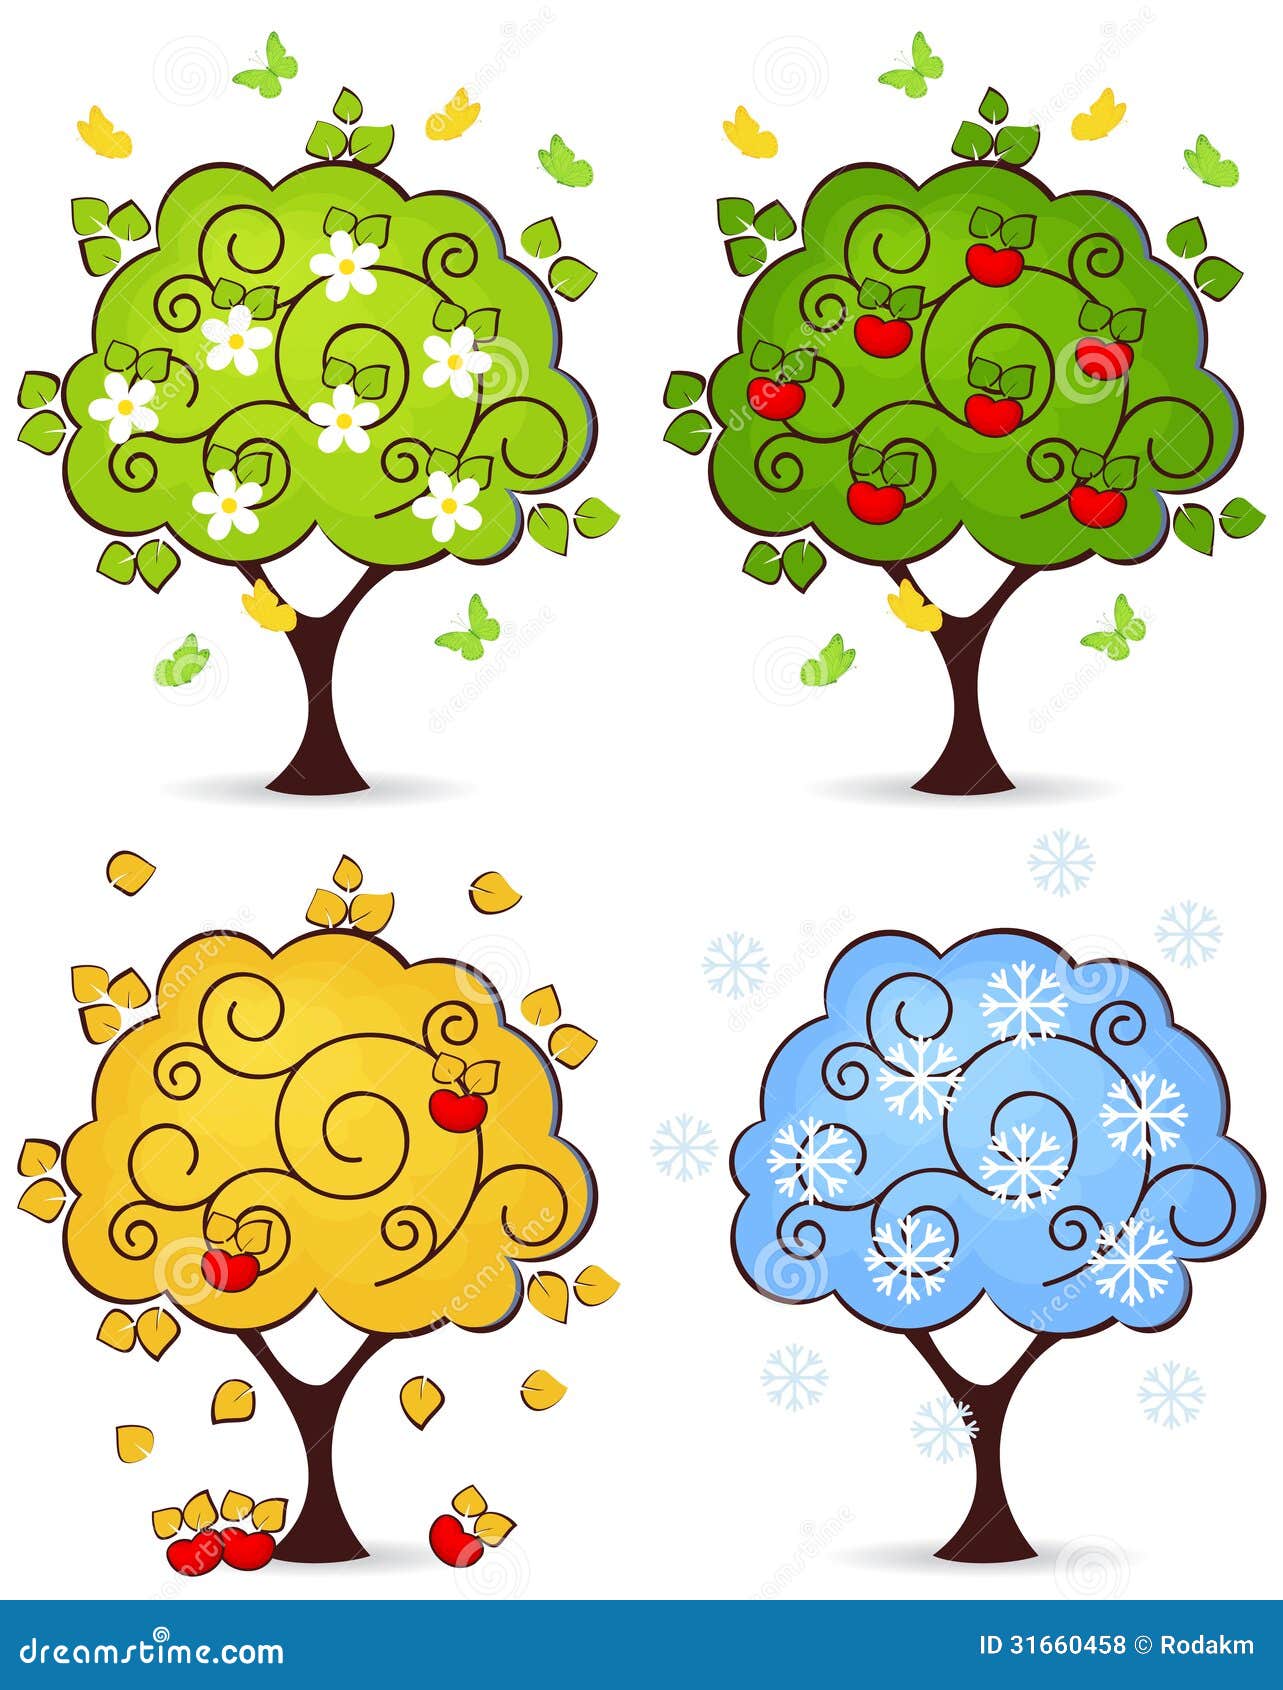 6 Colorful Artistic Trees Vector Download